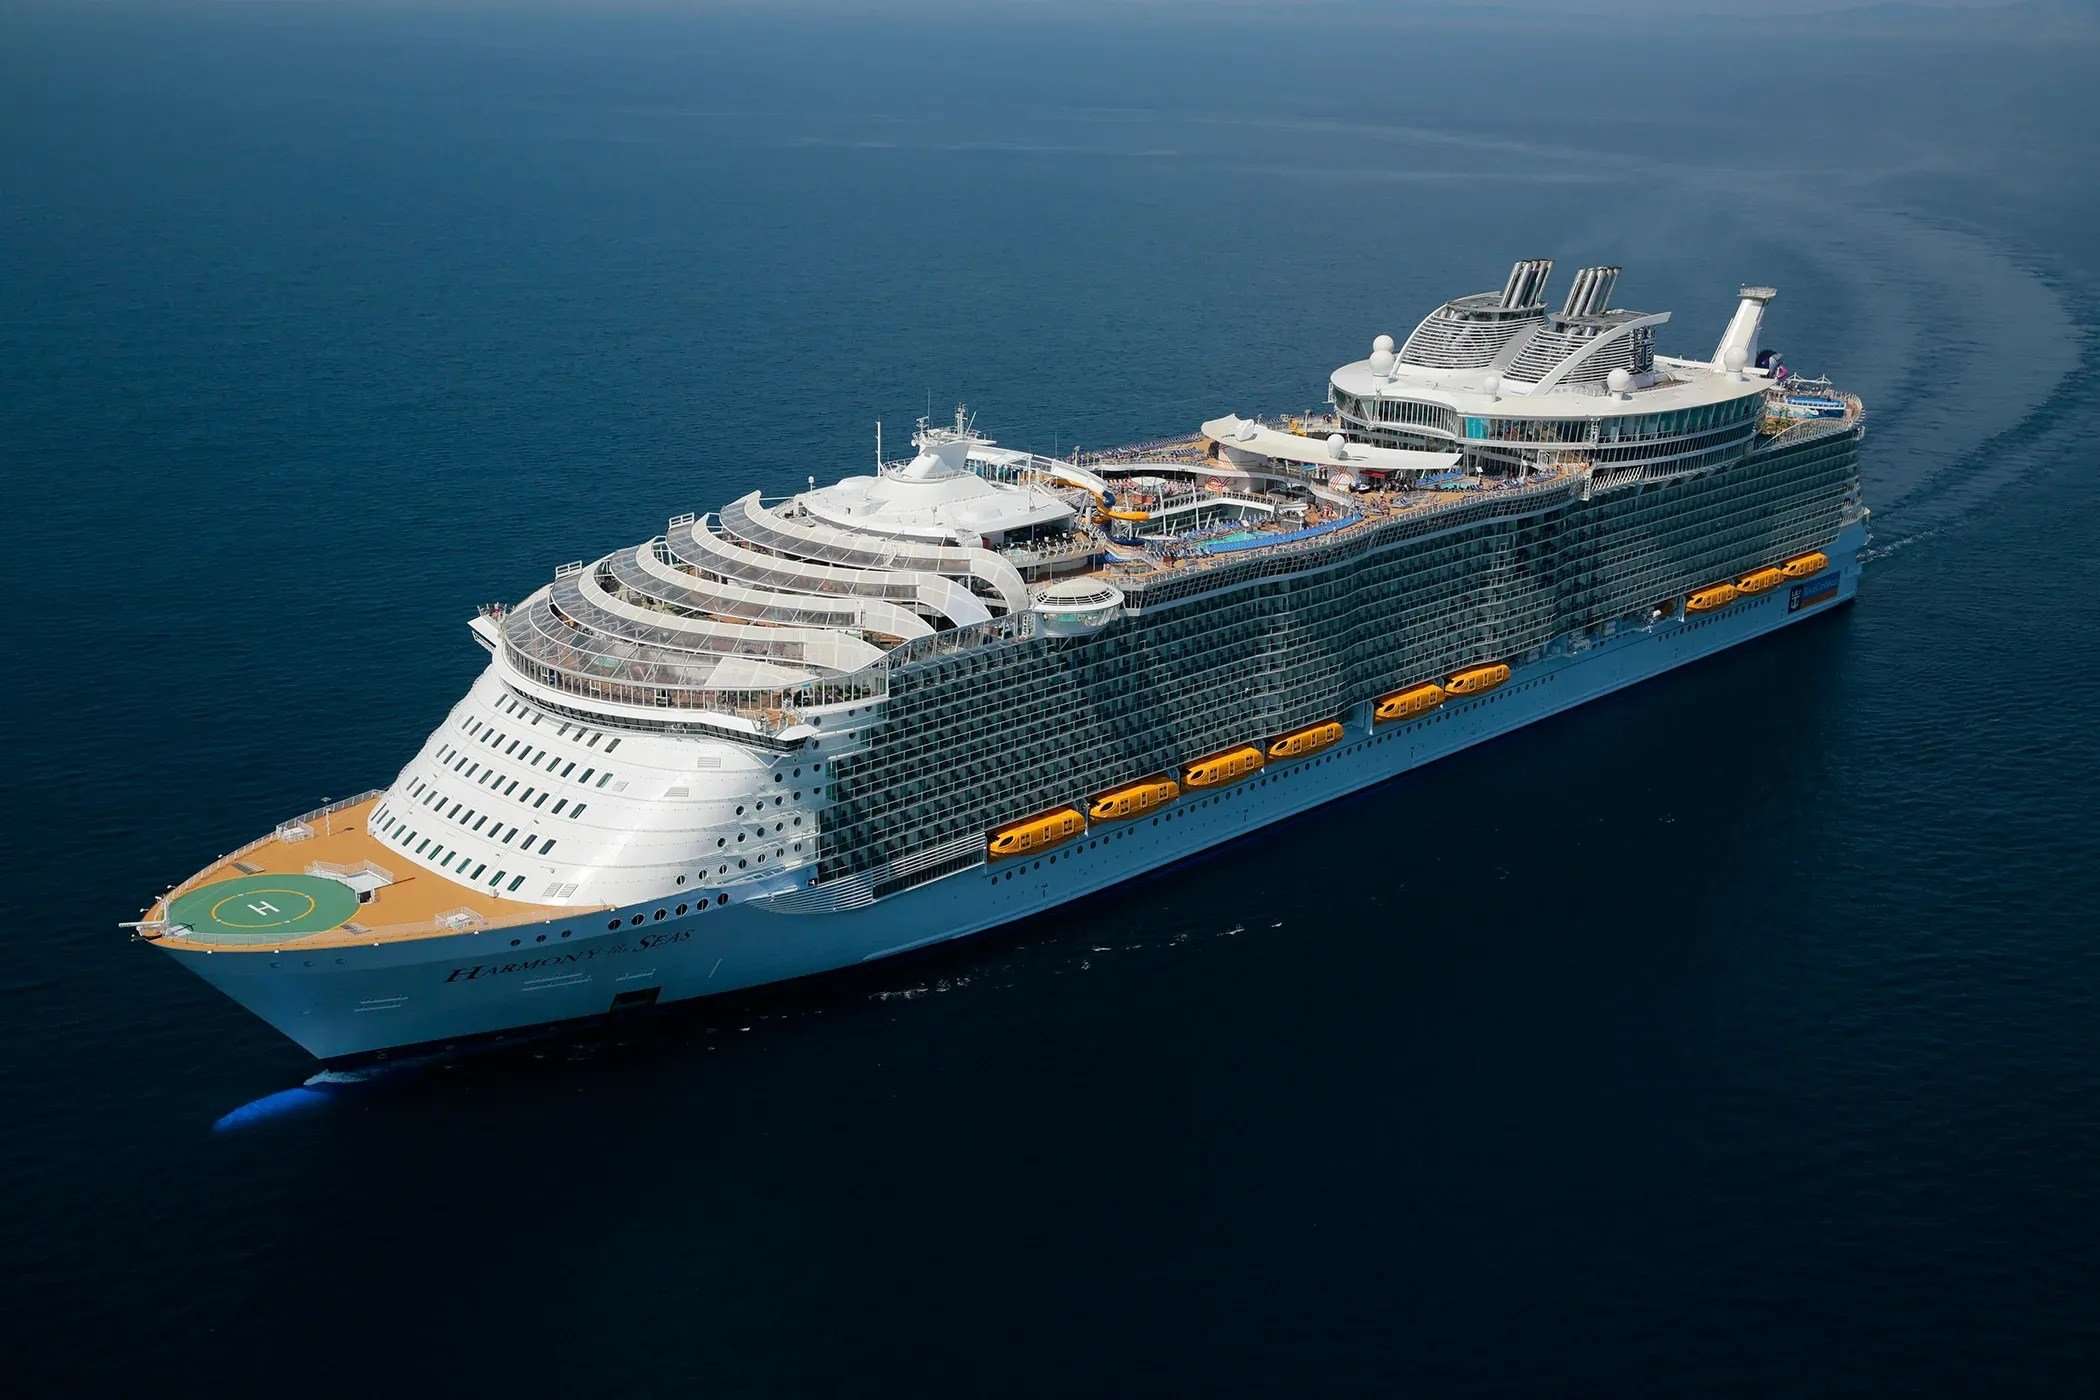 Construction of the biggest cruise ship ever delayed by ...